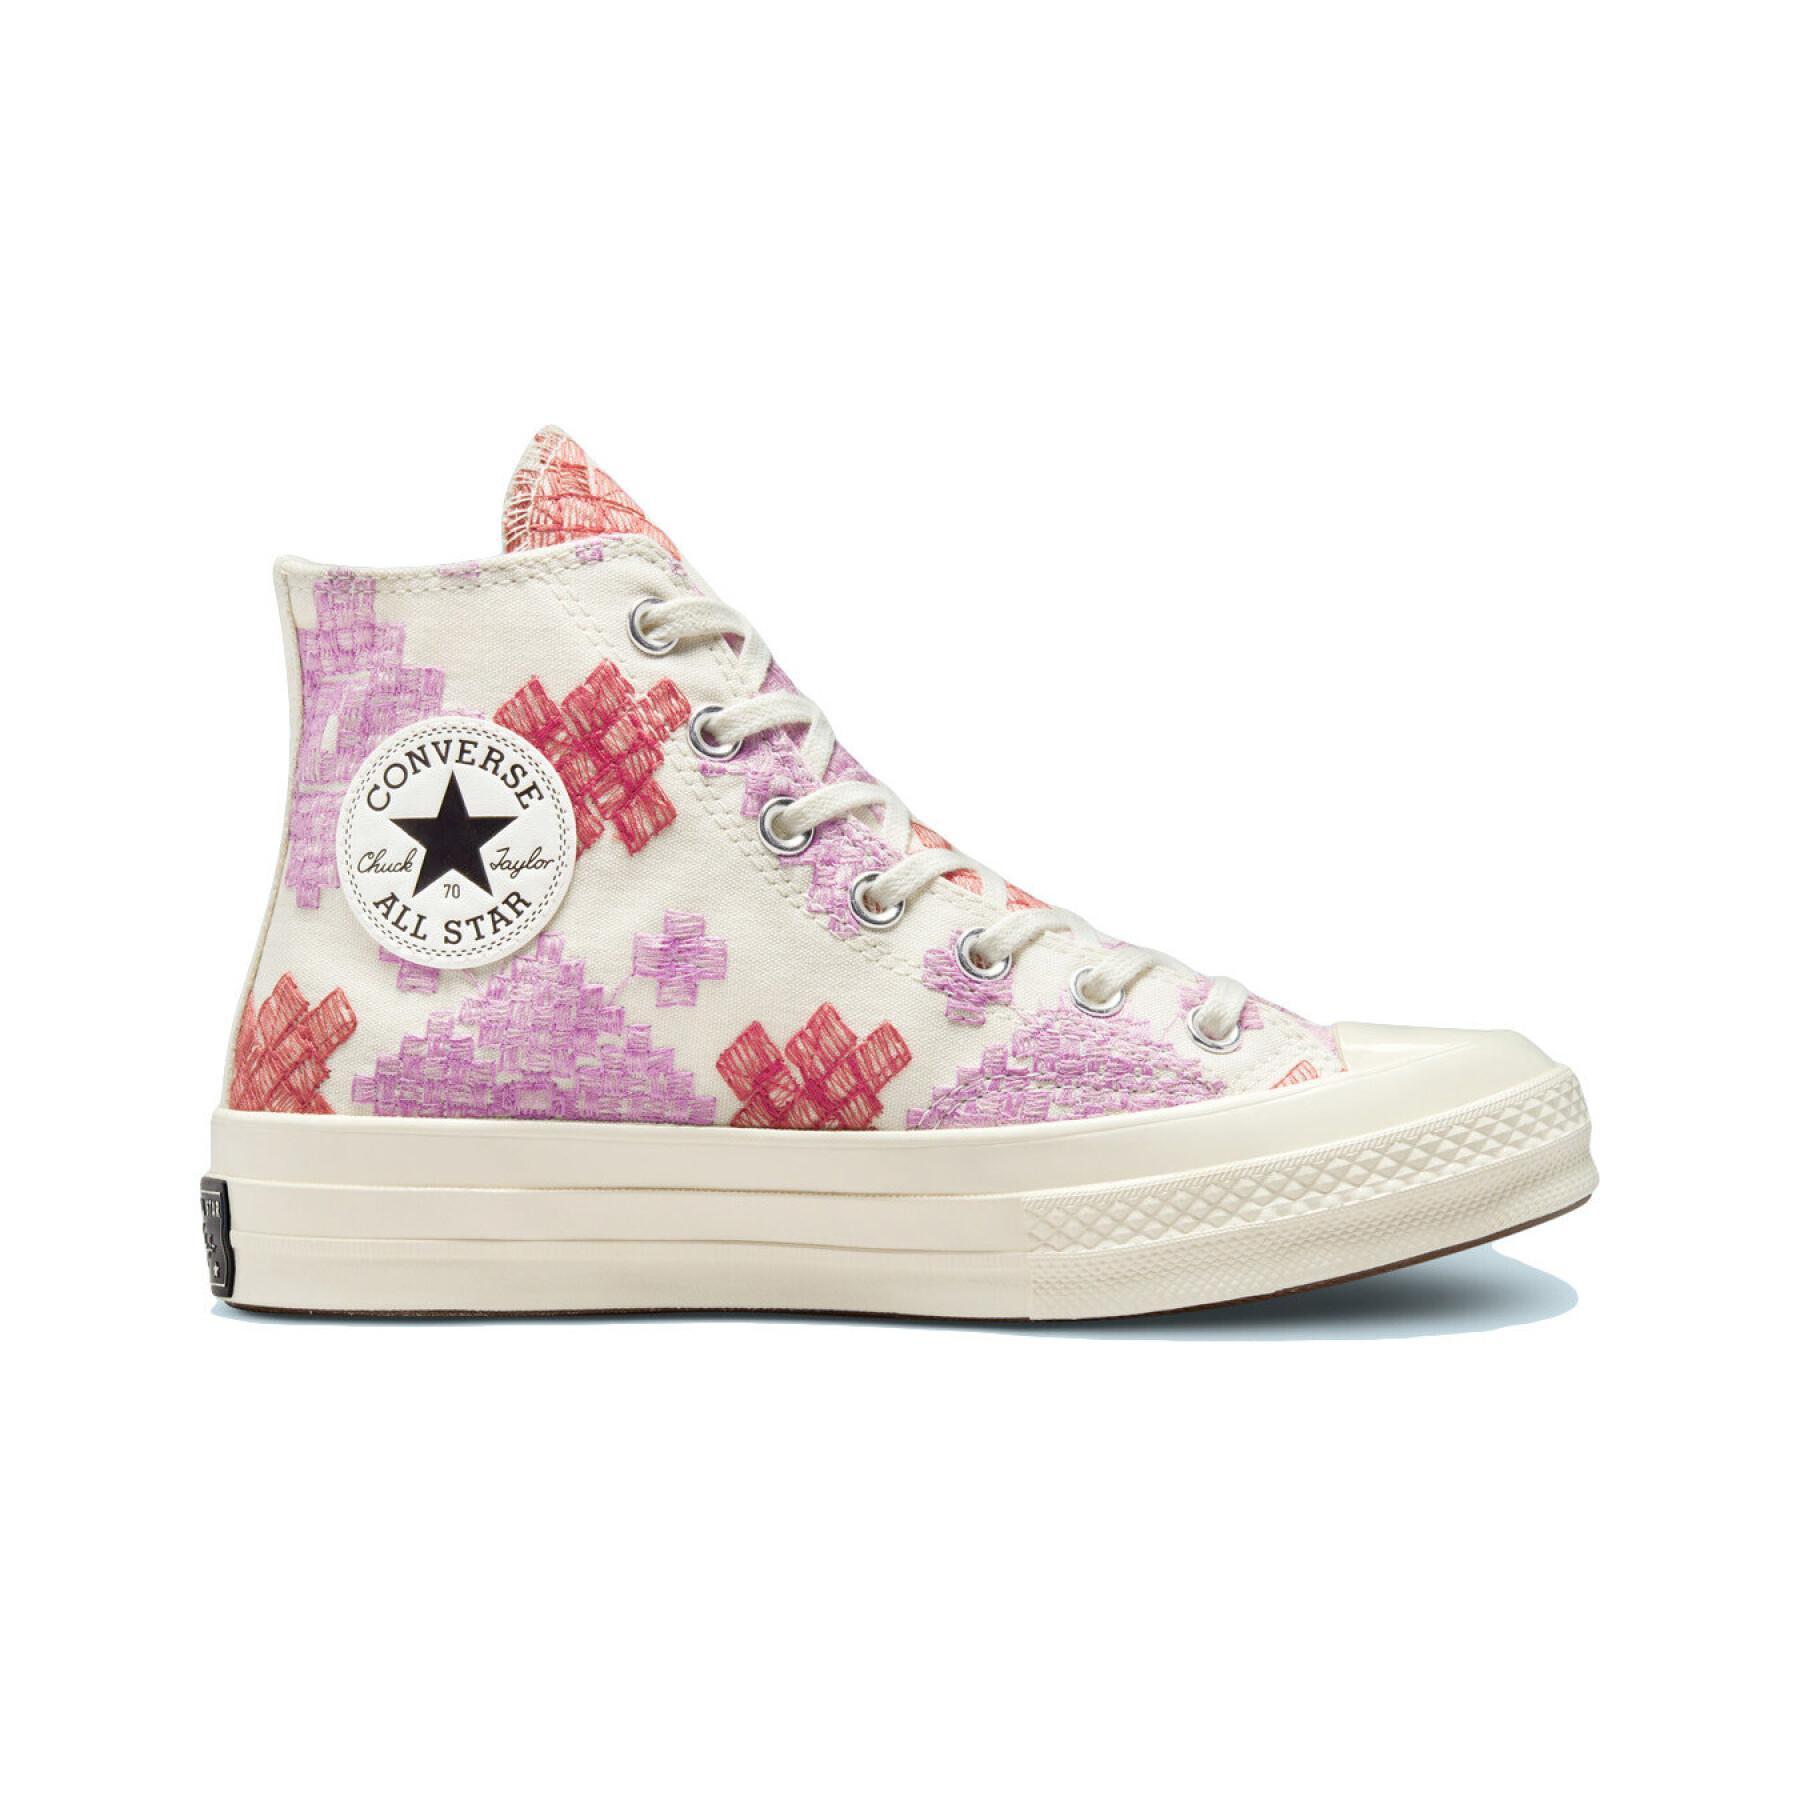 Women's sneakers Converse Chuck 70 Bright Embroidery